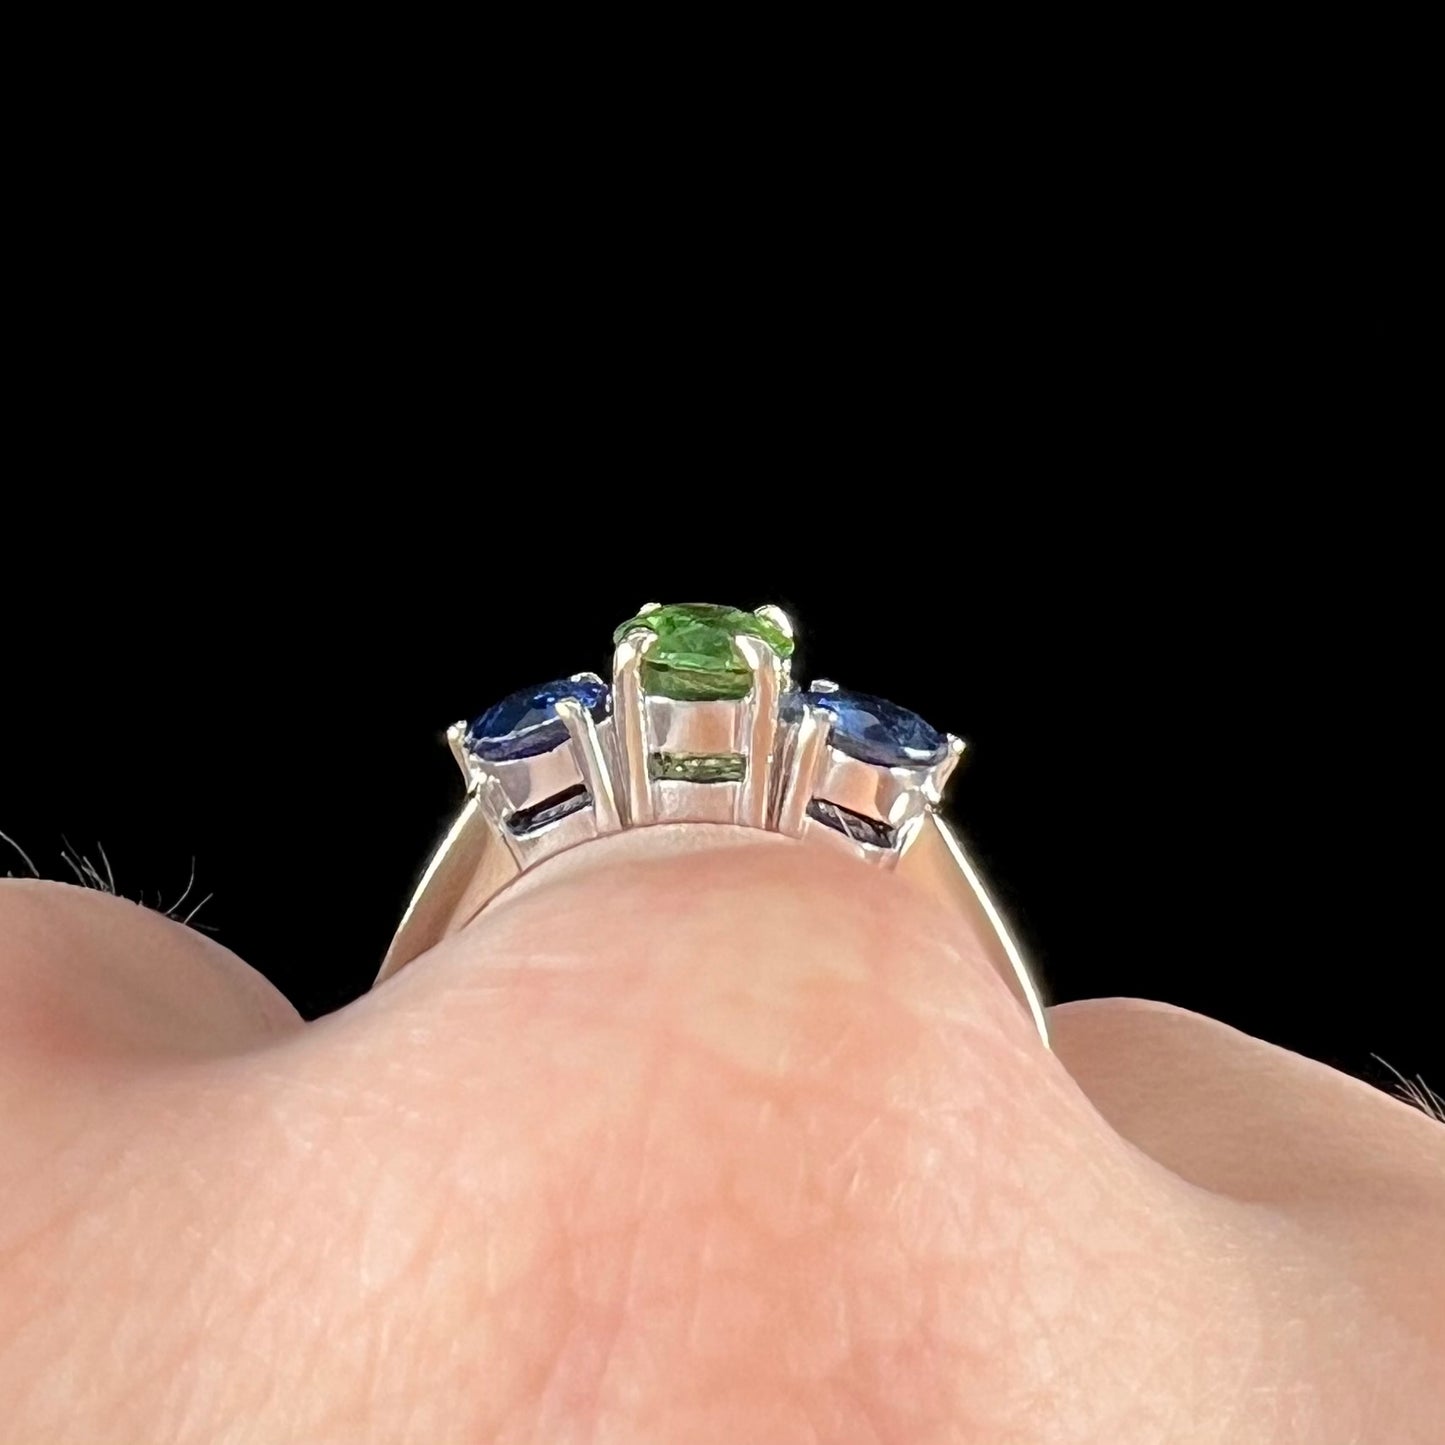 A ladies' white gold three stone ring set with two round blue sapphires and an oval cut green tsavorite garnet.